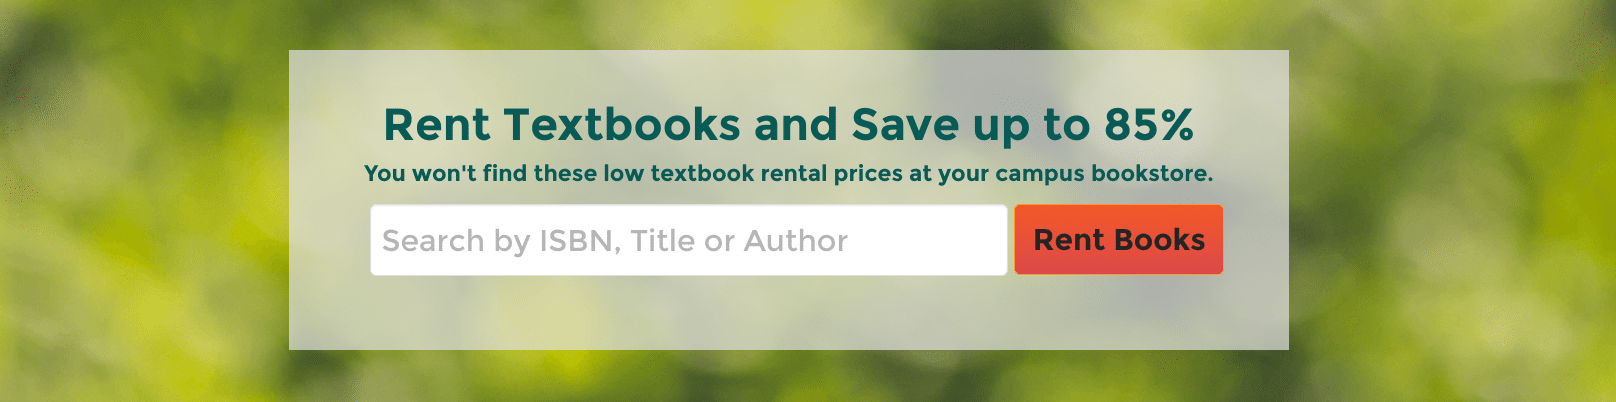 Knetbooks Review: how to save 85%